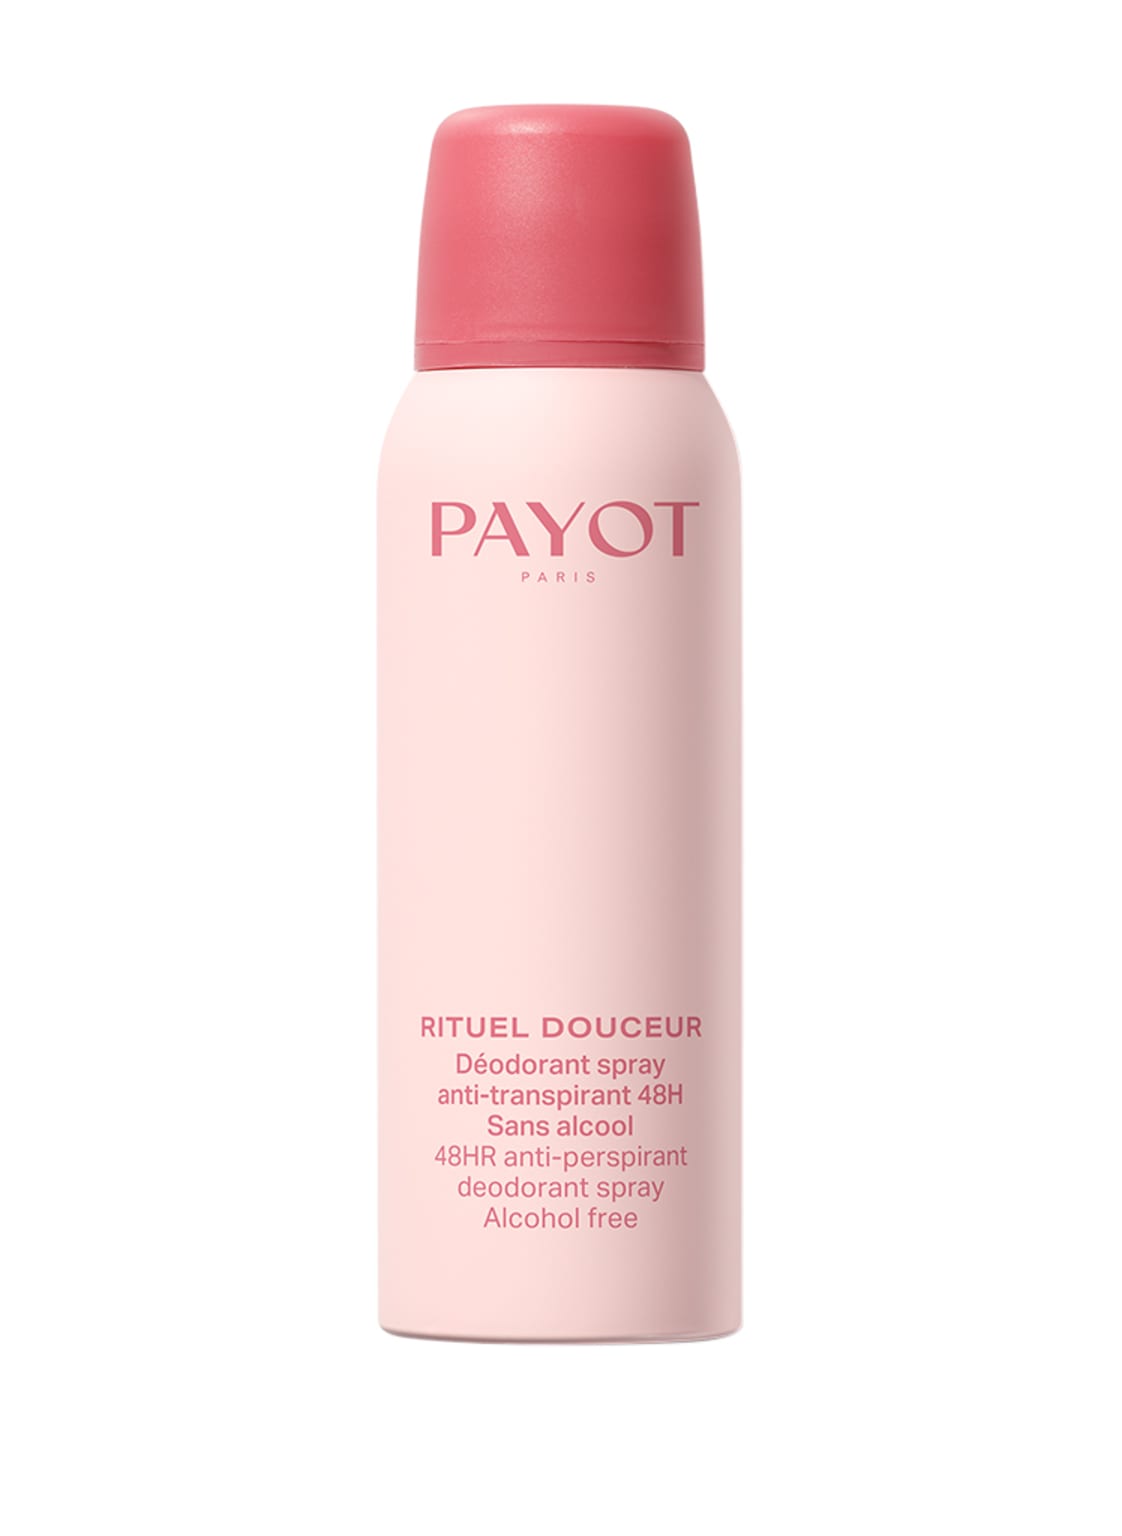 Payot Rituel Douceur 48HR anti-perspirant 125 ml von PAYOT